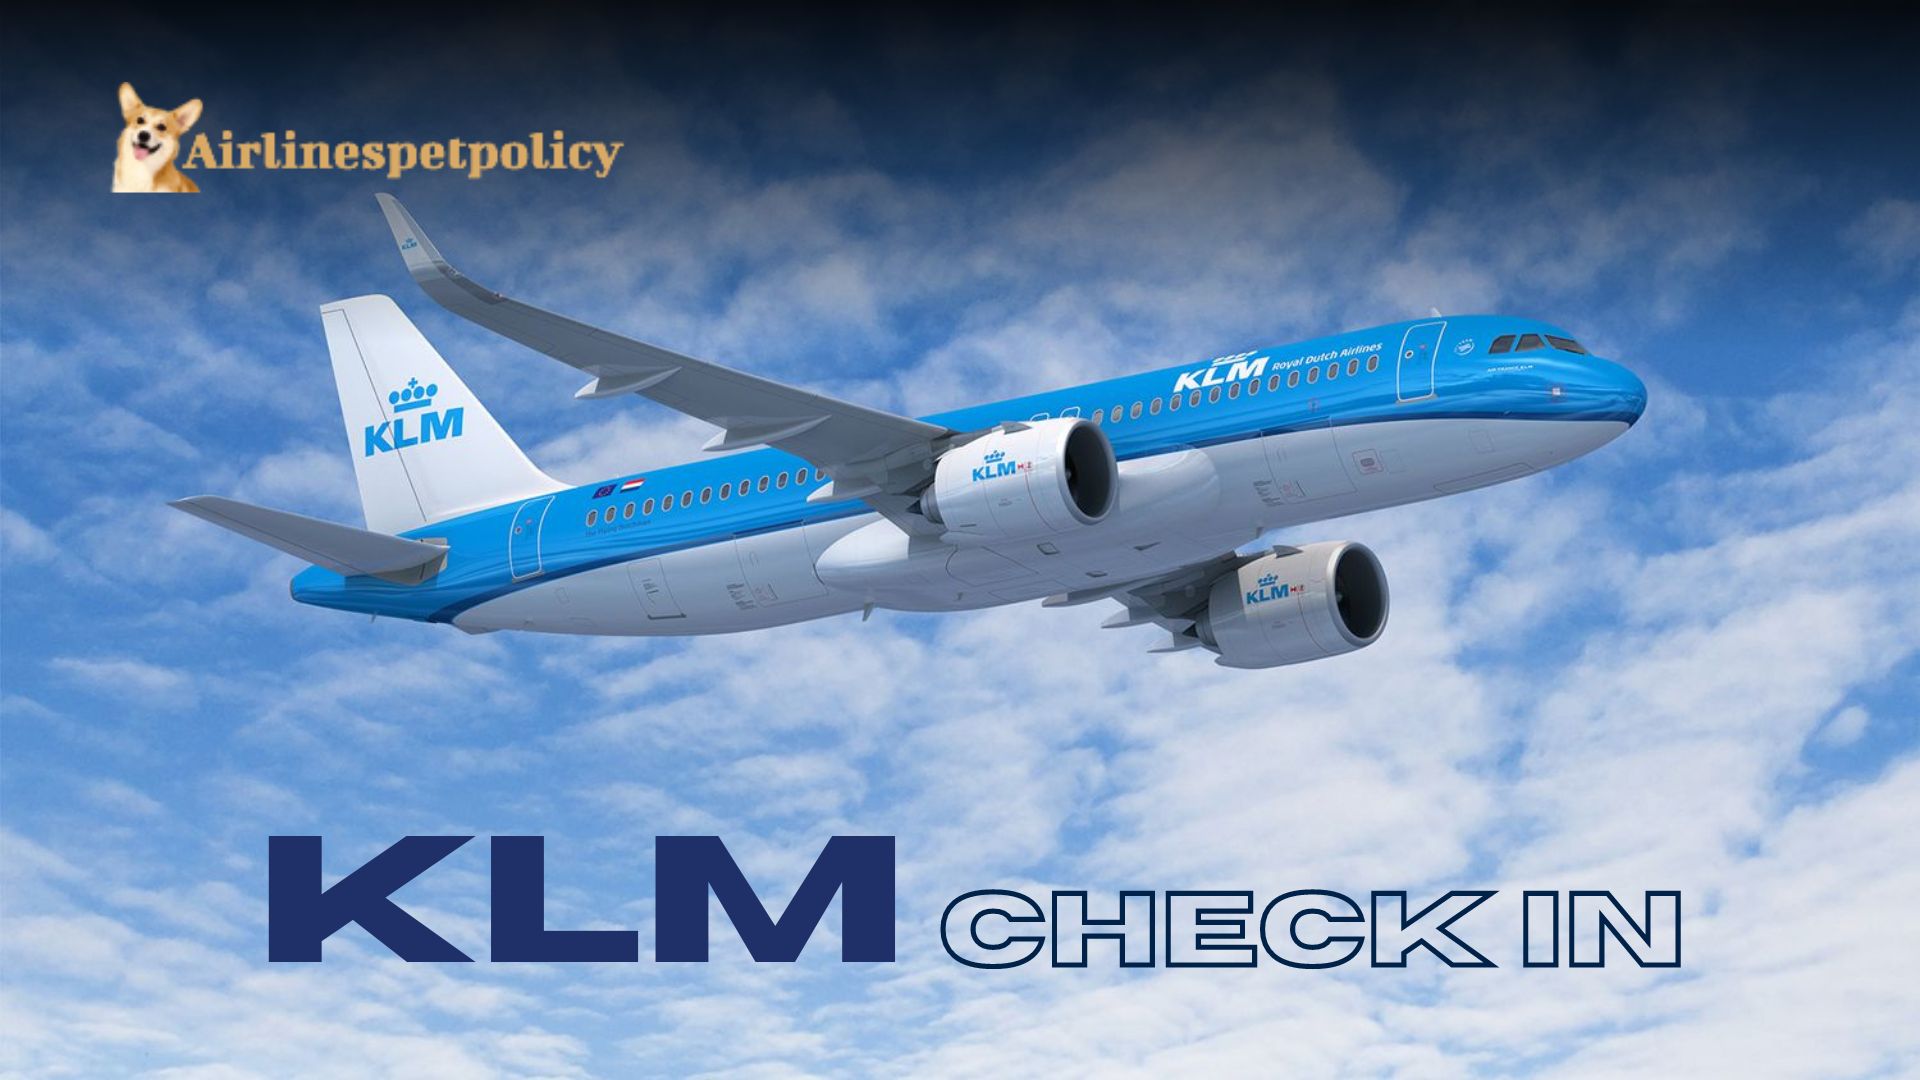 KLM Check In Policy | 24 Hour | +1-844-902-4930